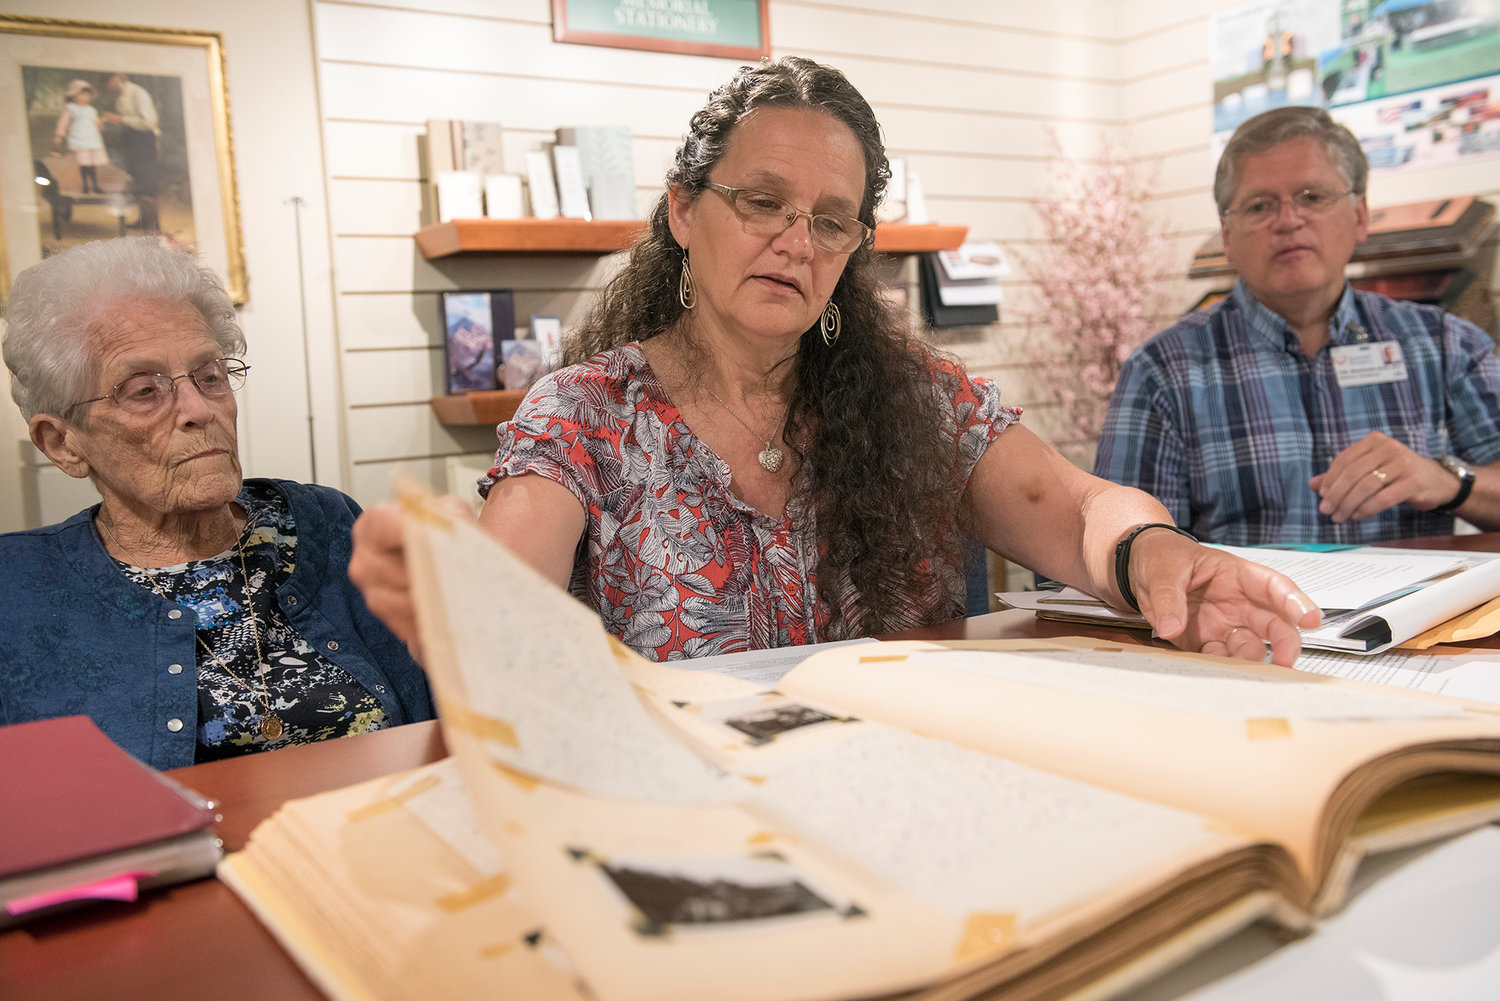 In this photo taken on Friday, July 7, 2017, Jan Bradshaw, center, alongside her mother, Jeanne Louvier, and husband, Tom, looks through a scrapbook compiled by her grandmother of her uncle's correspondences with his family while serving in Europe during World War II. William "Bill" James Gray, Jr. died while serving in Germany on April 16, 1945. 